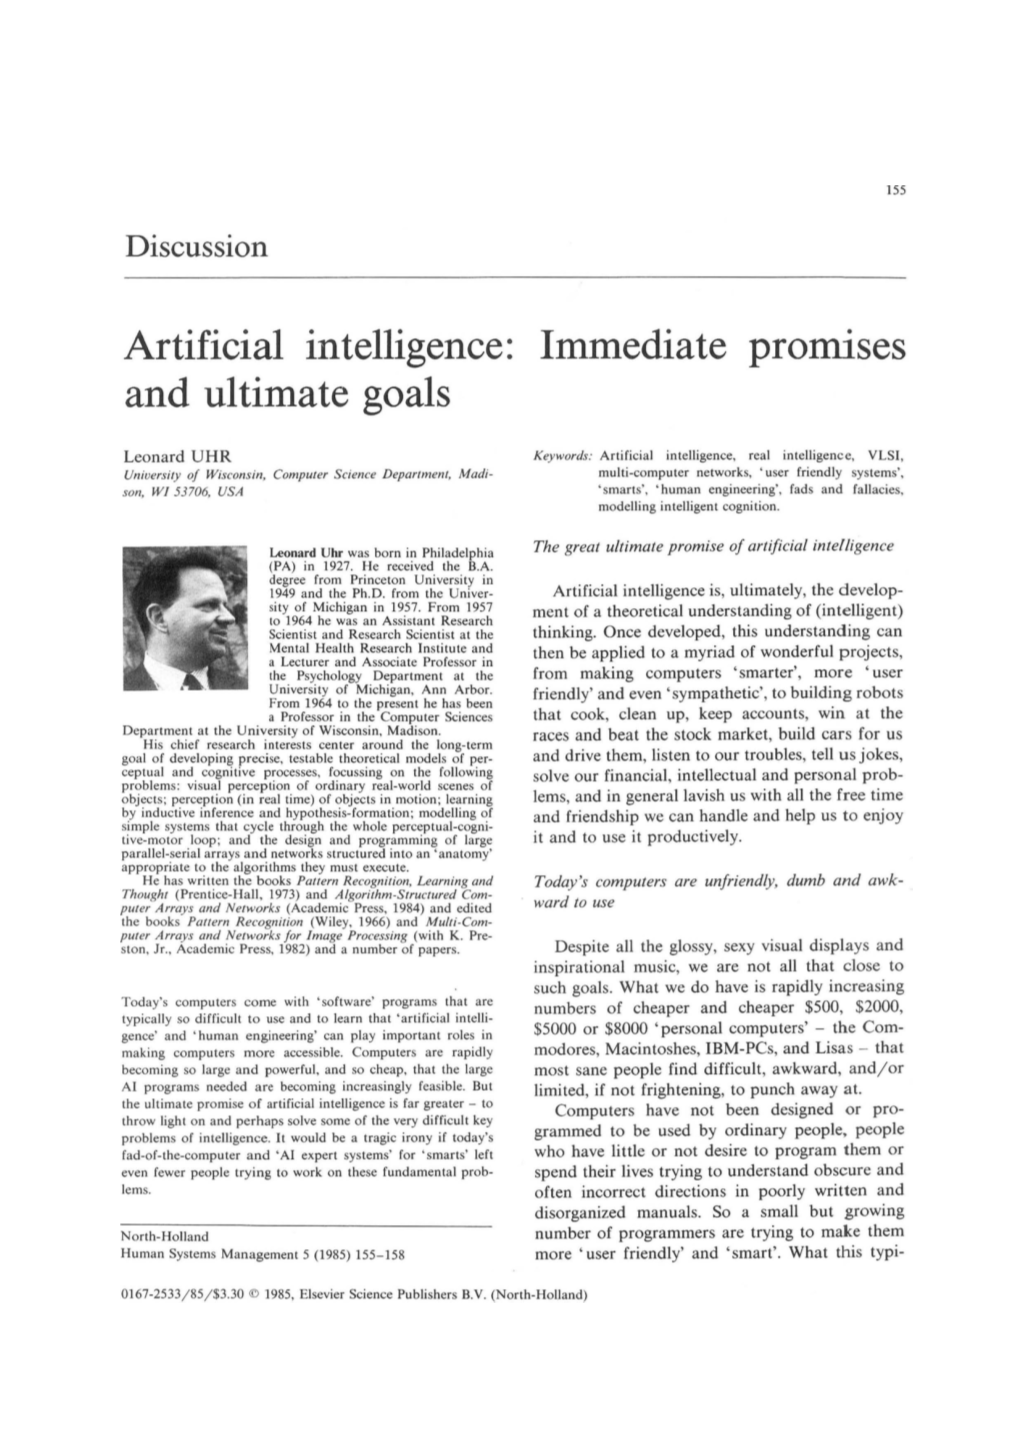 Artificial Intelligence: Immediate Pronnses and Ultimate Goals